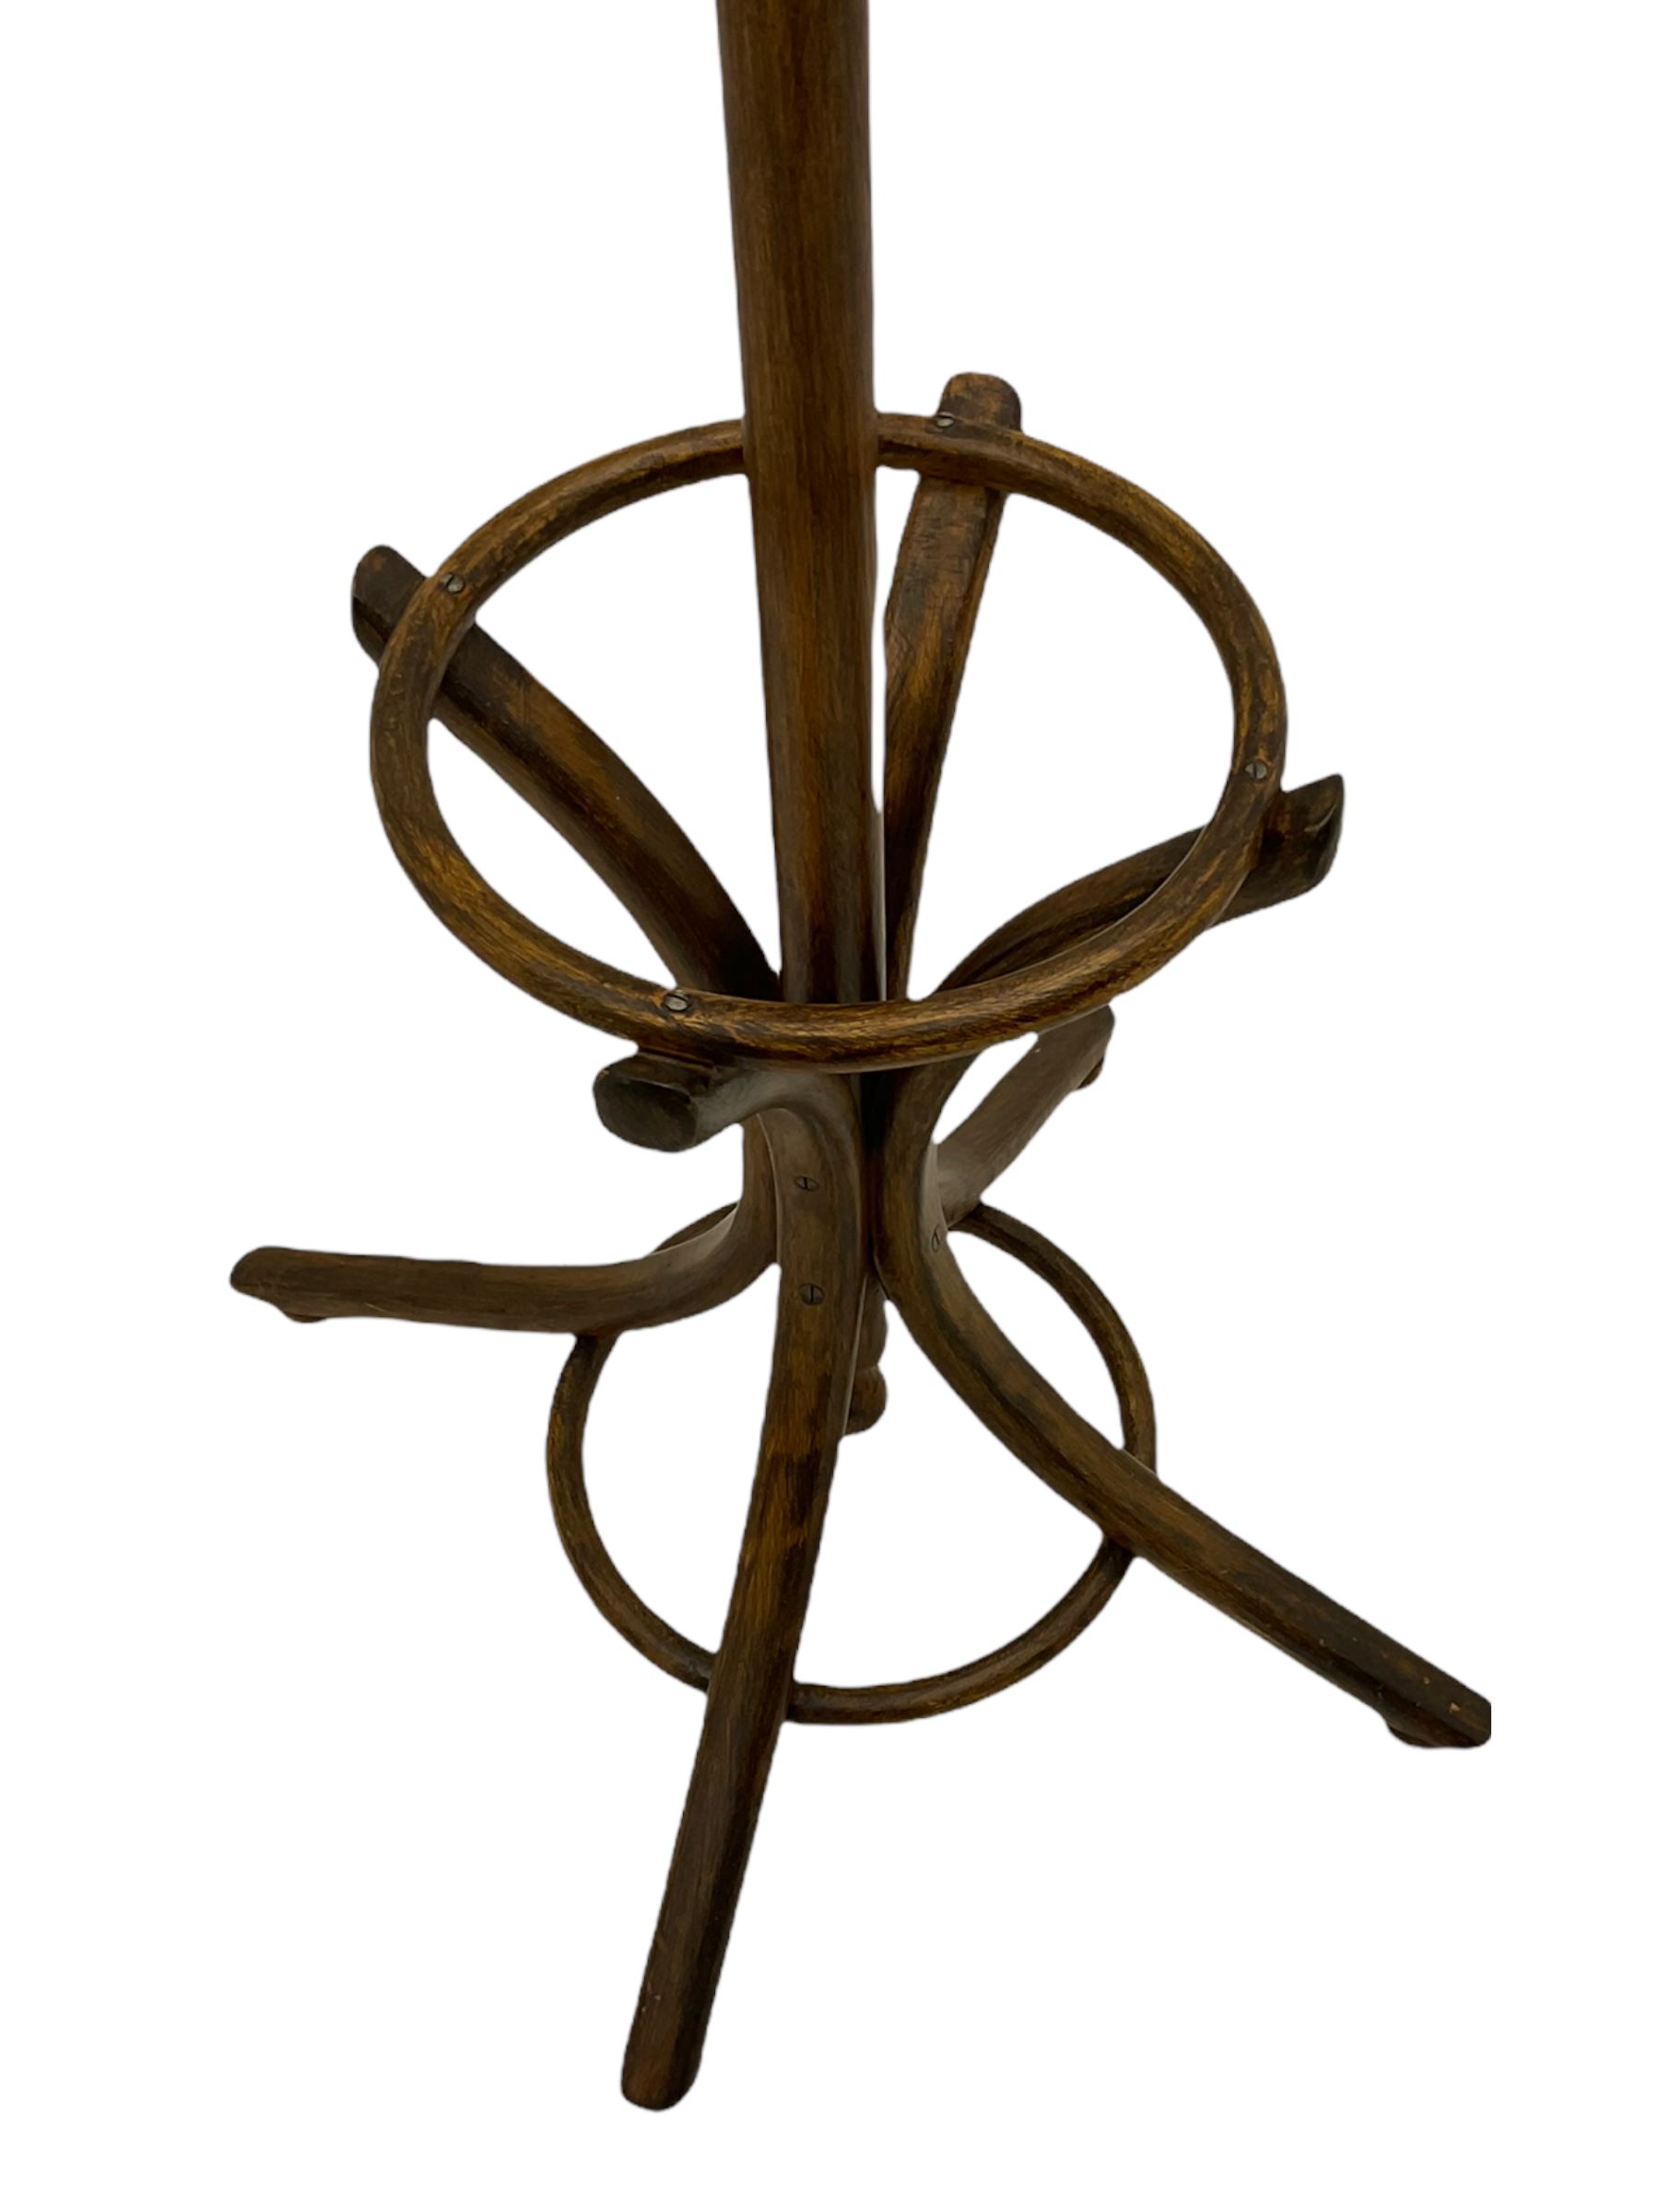 20th century bentwood hat and coat stand - Image 3 of 6